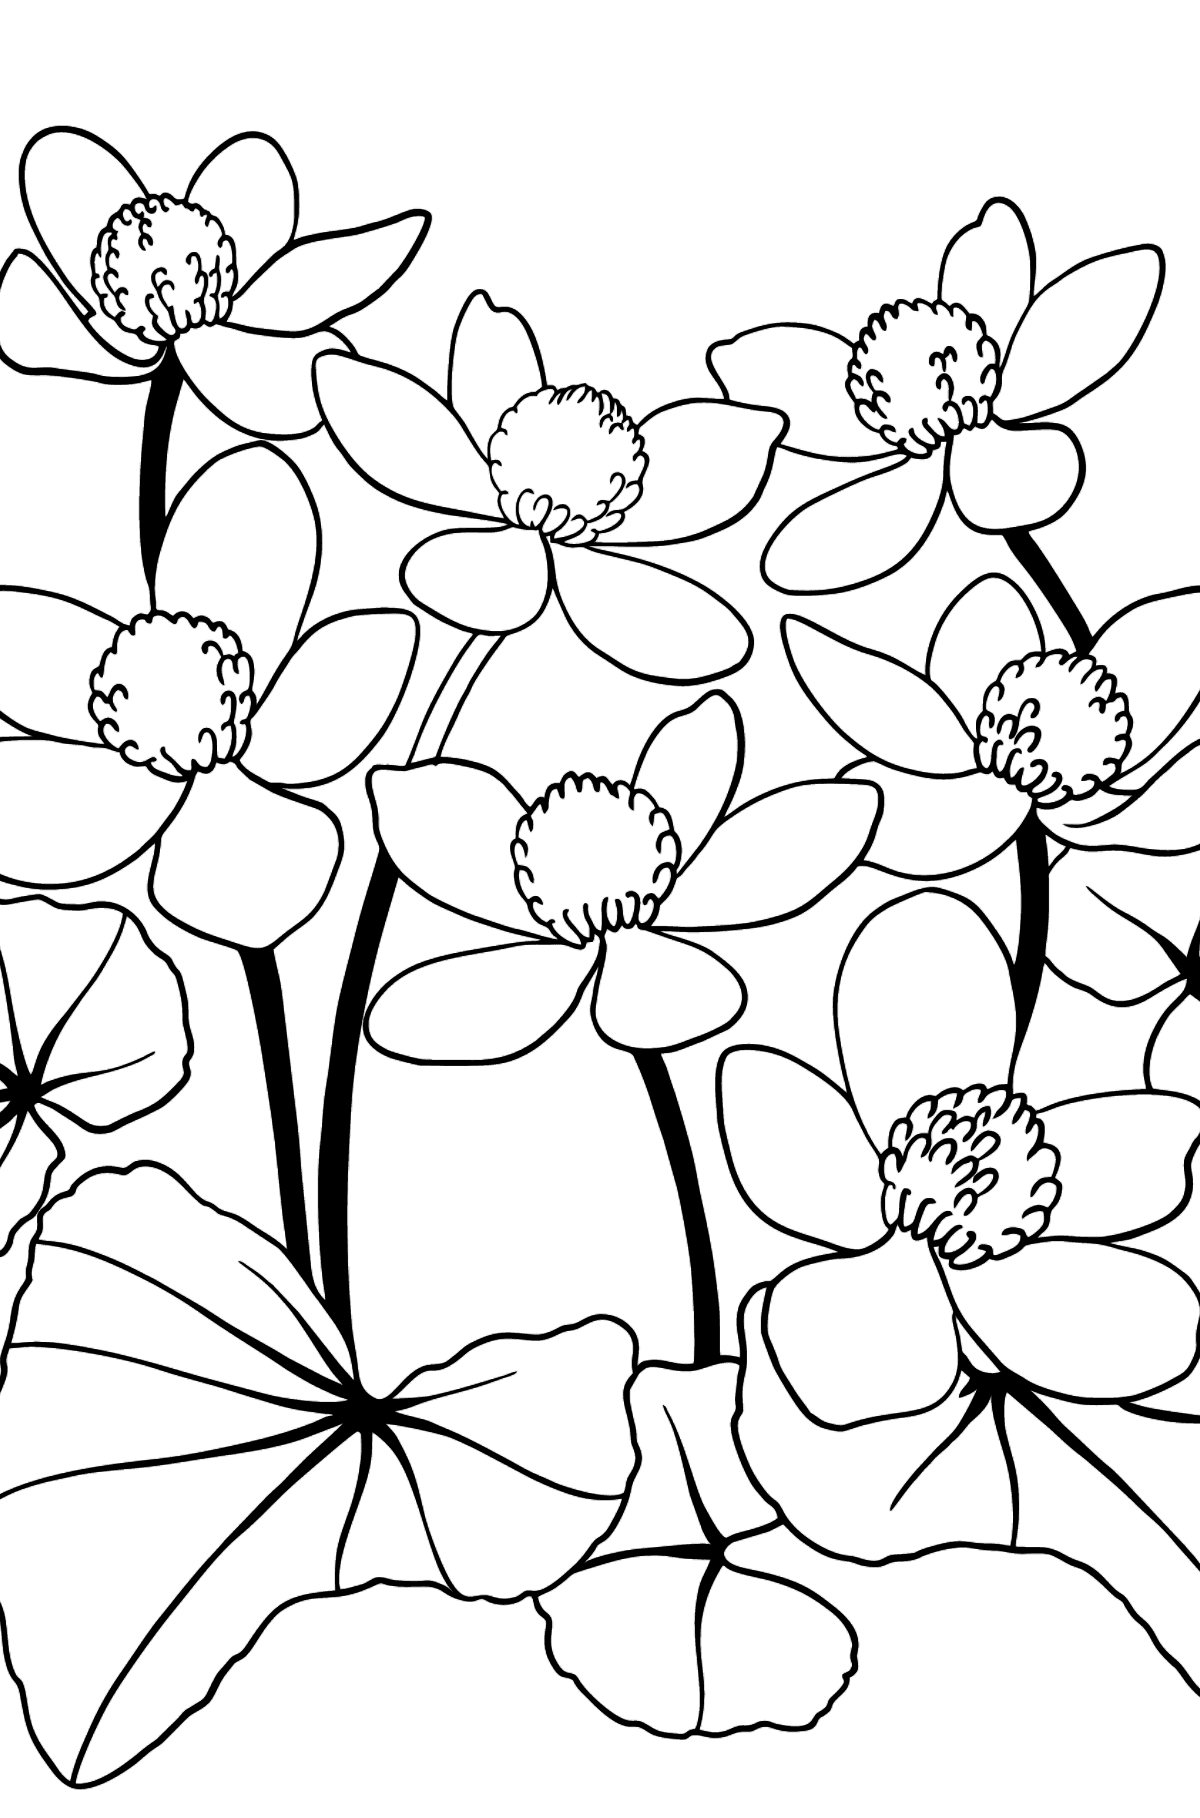 Flower Coloring Page - Marsh Marigold - Coloring Pages for Kids